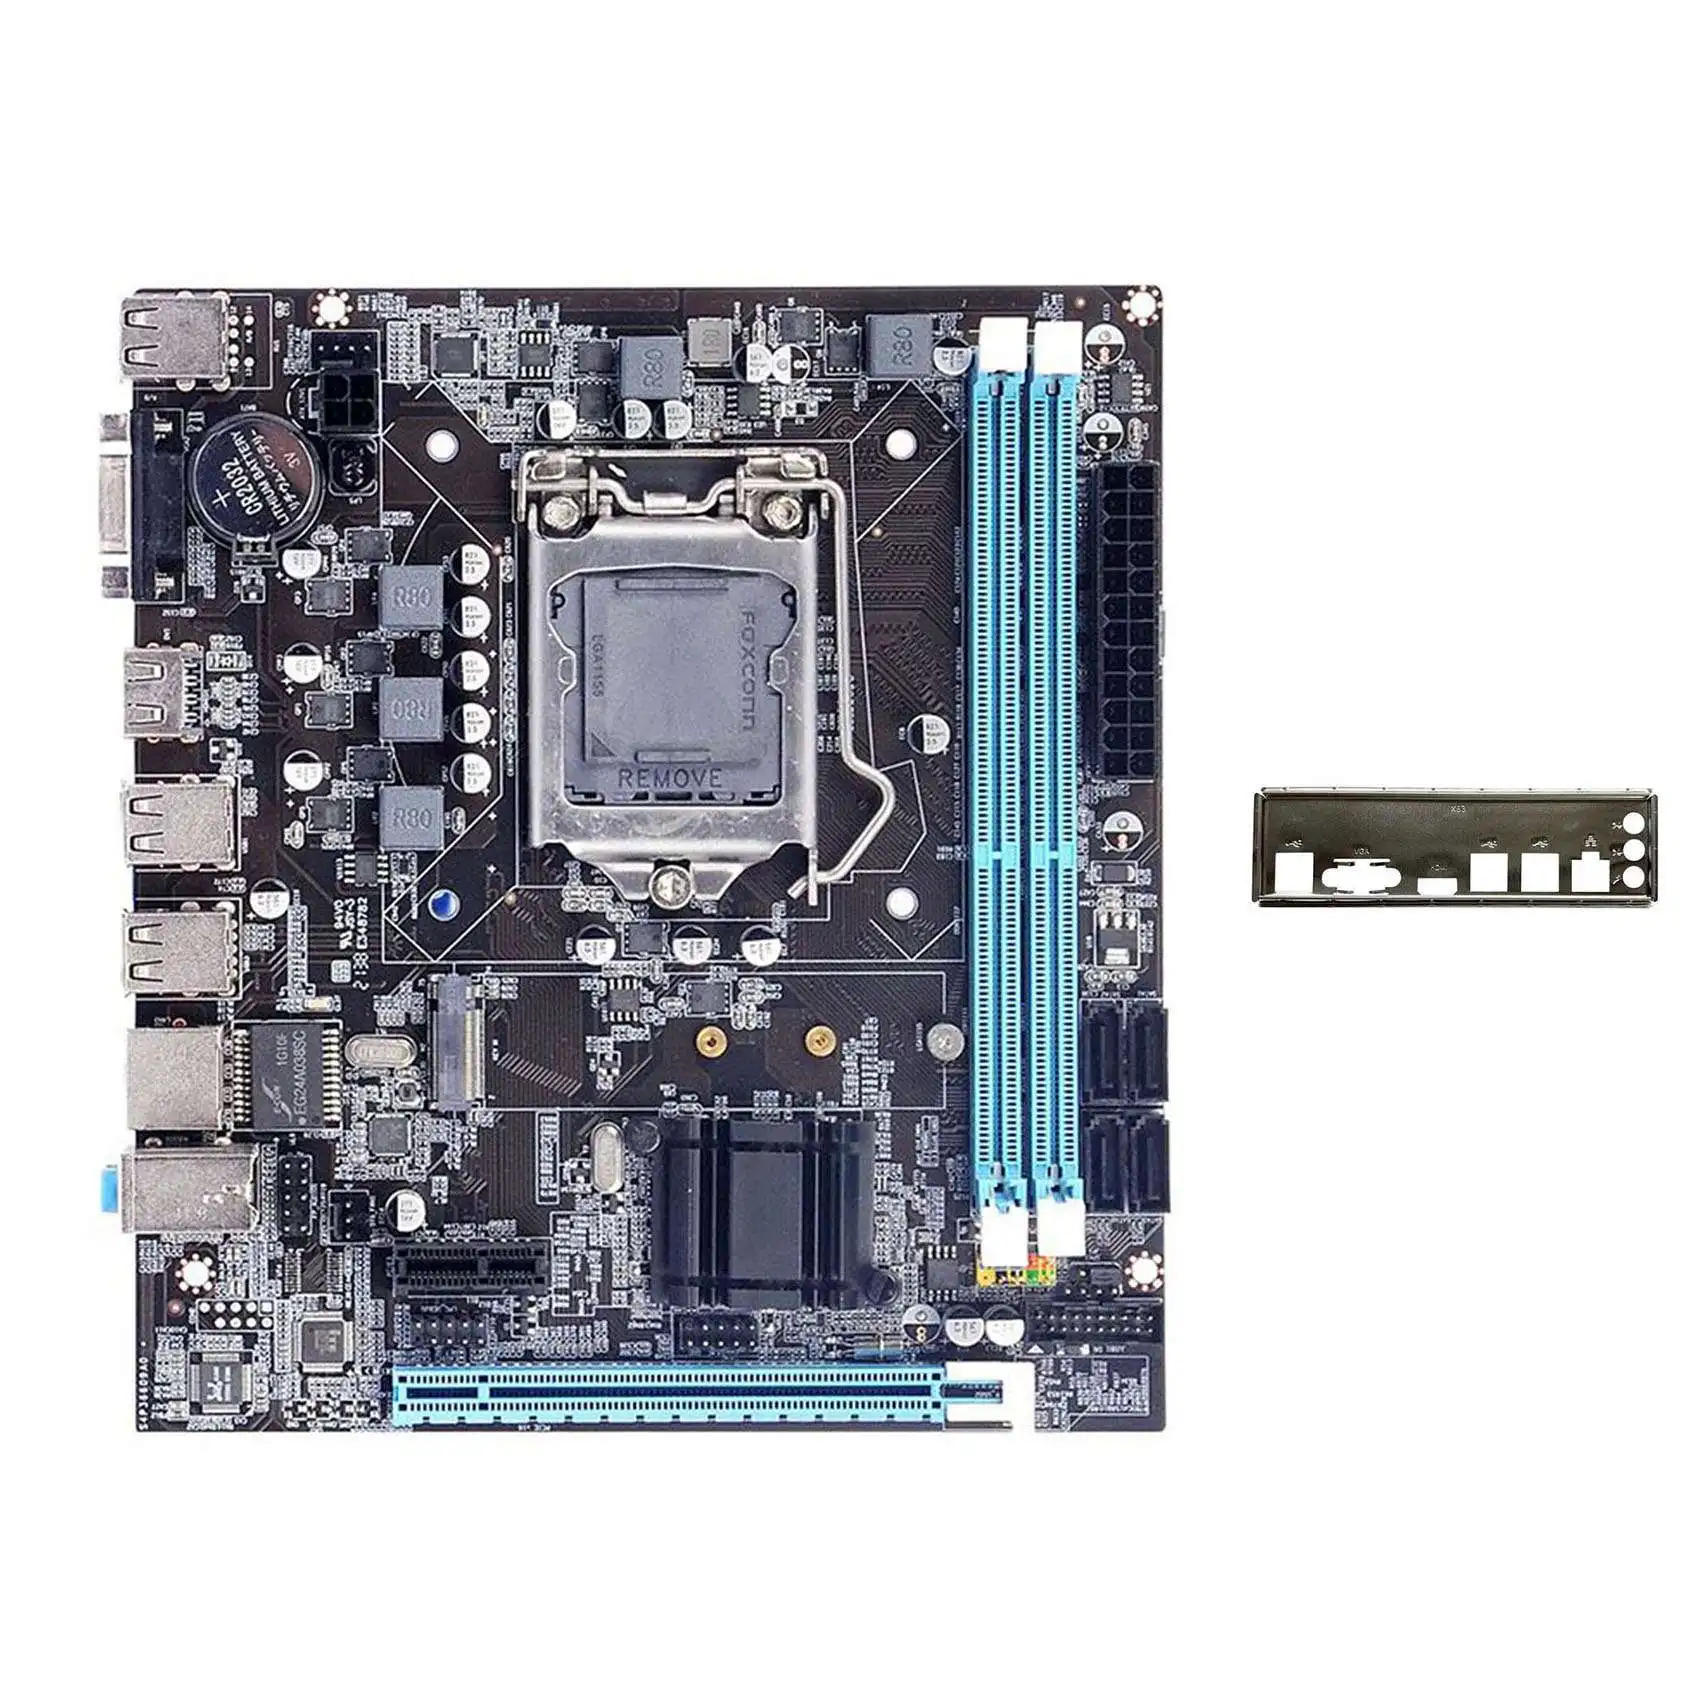 

H61 Motherboard+Baffle LGA1155 M.2 NVME Support 2XDDR3 RAM PCIE 16X for Office for PUBG CF LOL Gaming Motherboard